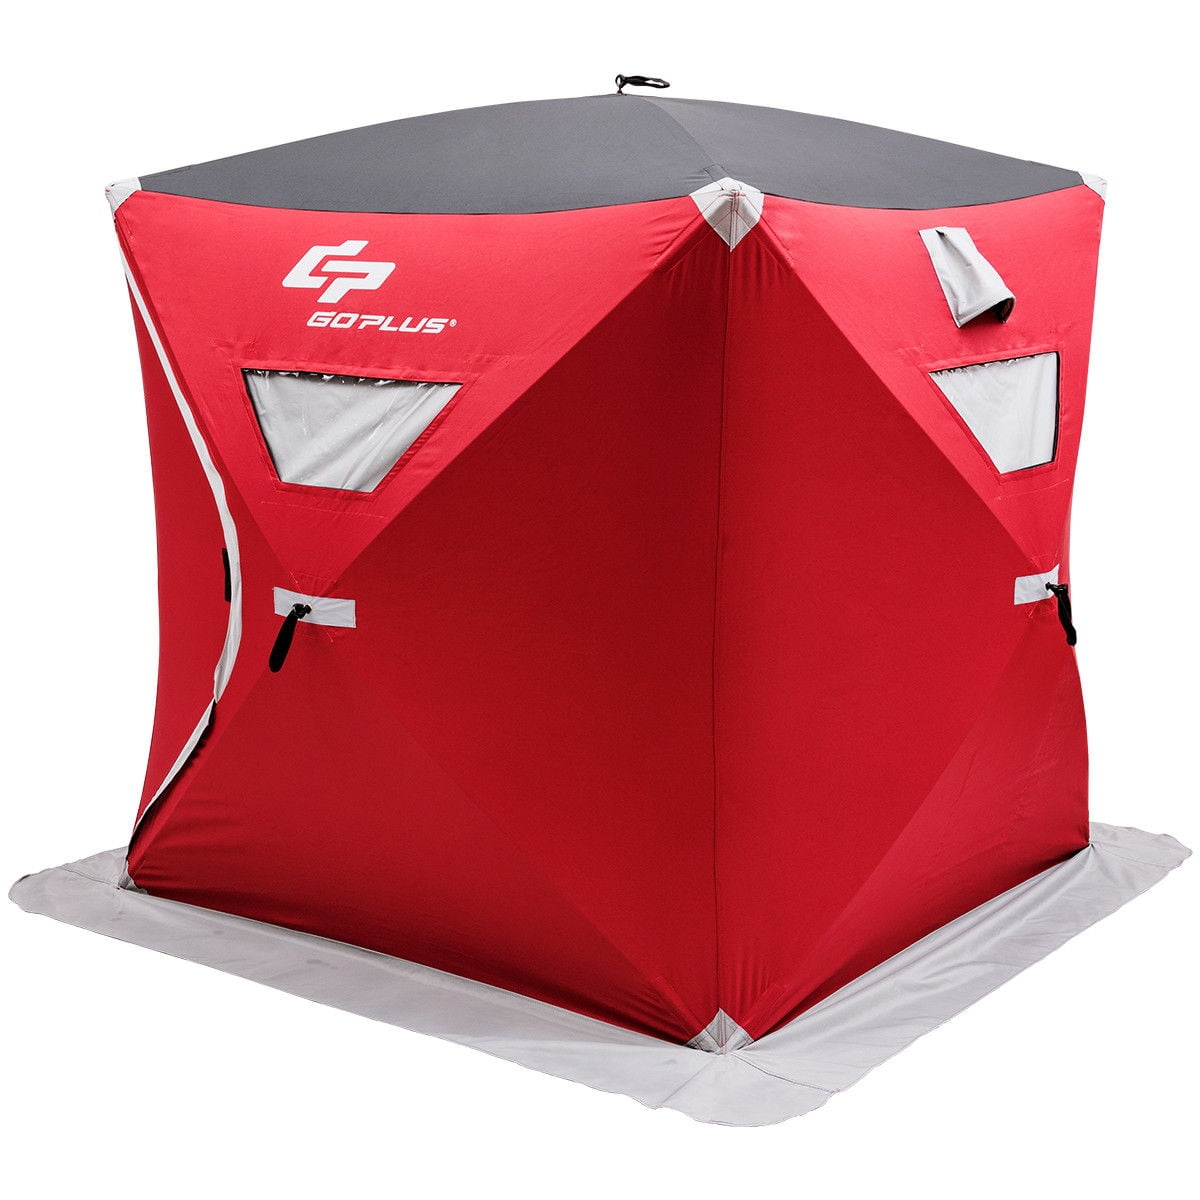 Portable Folding Pop-up 2-Person Ice Fishing Shelter Palestine